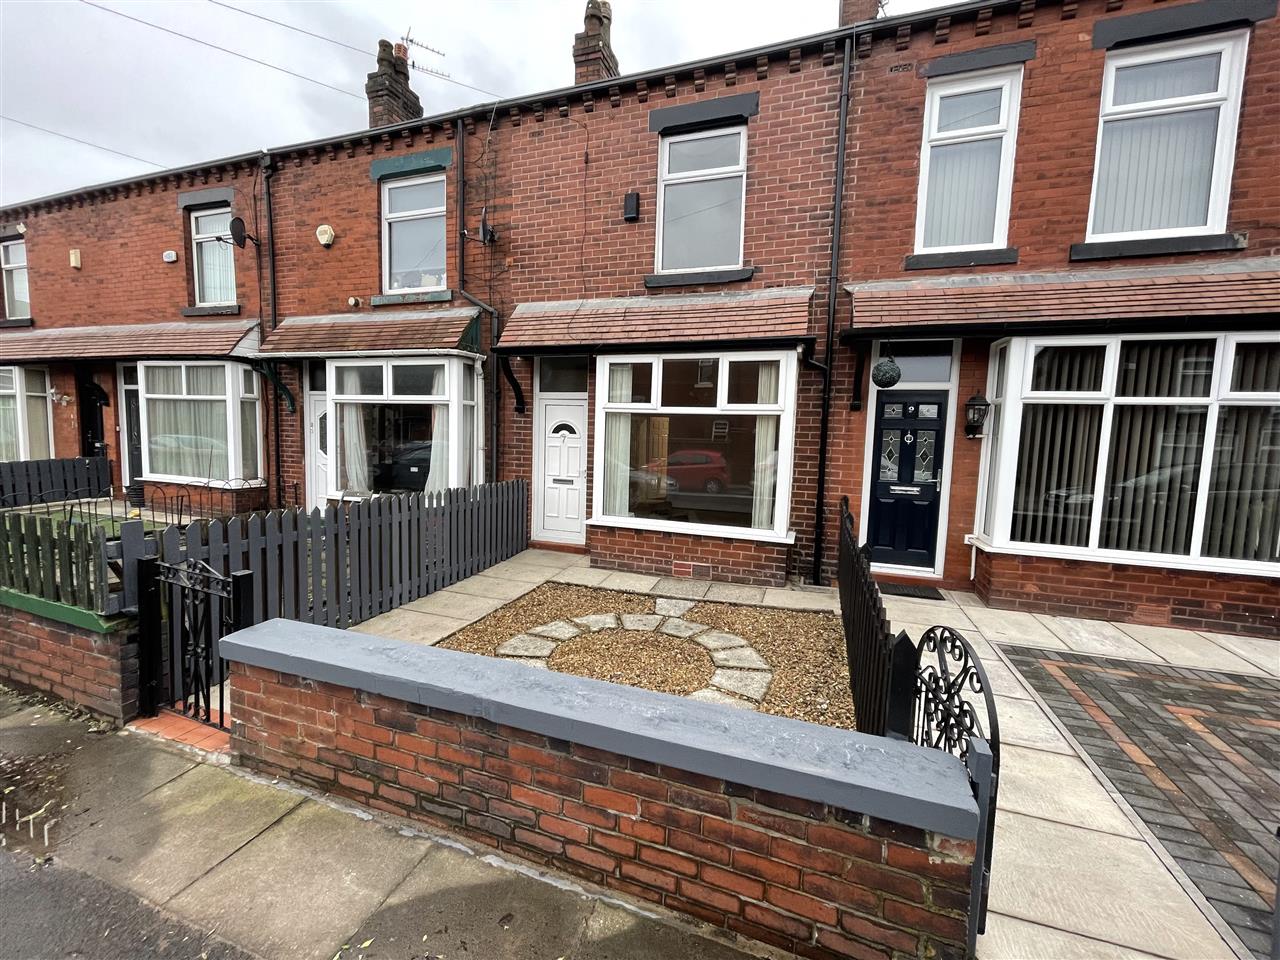 2 bed terraced for sale in Ashbee Street, Bolton - Property Image 1